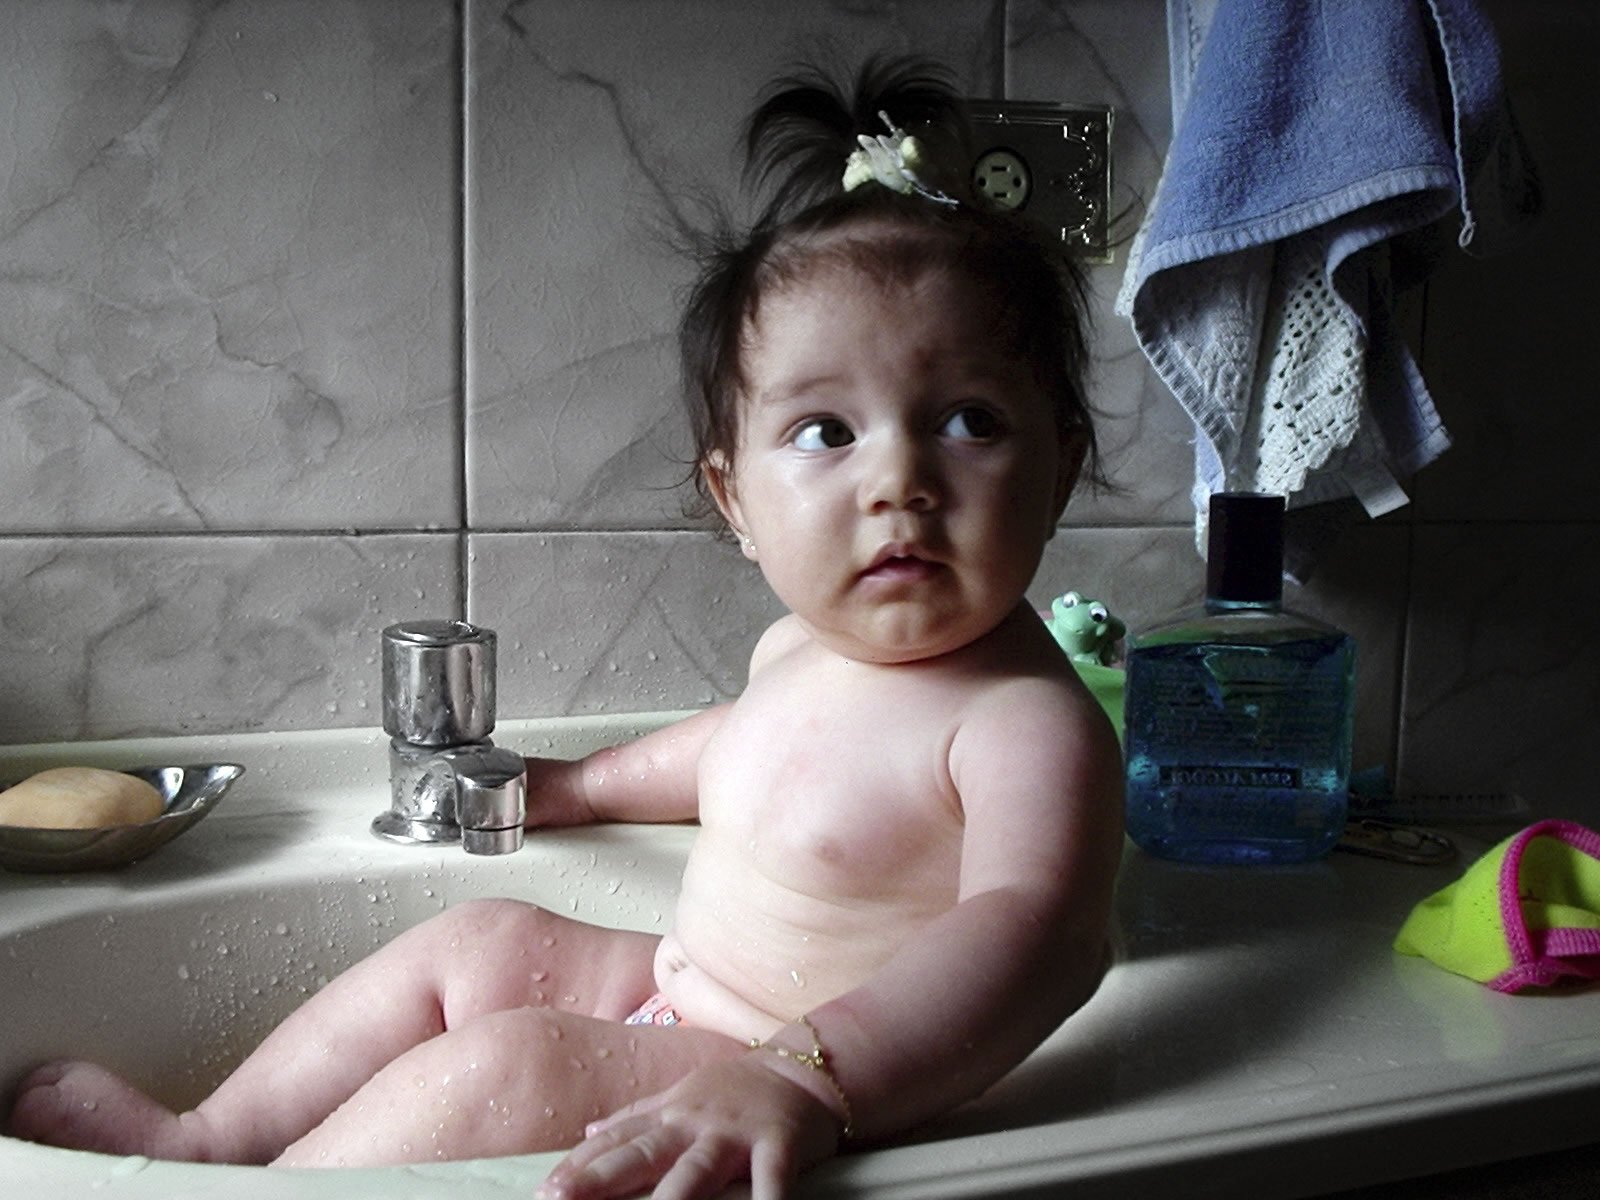 a child sits in a bathroom sink as it appears to be having a bath